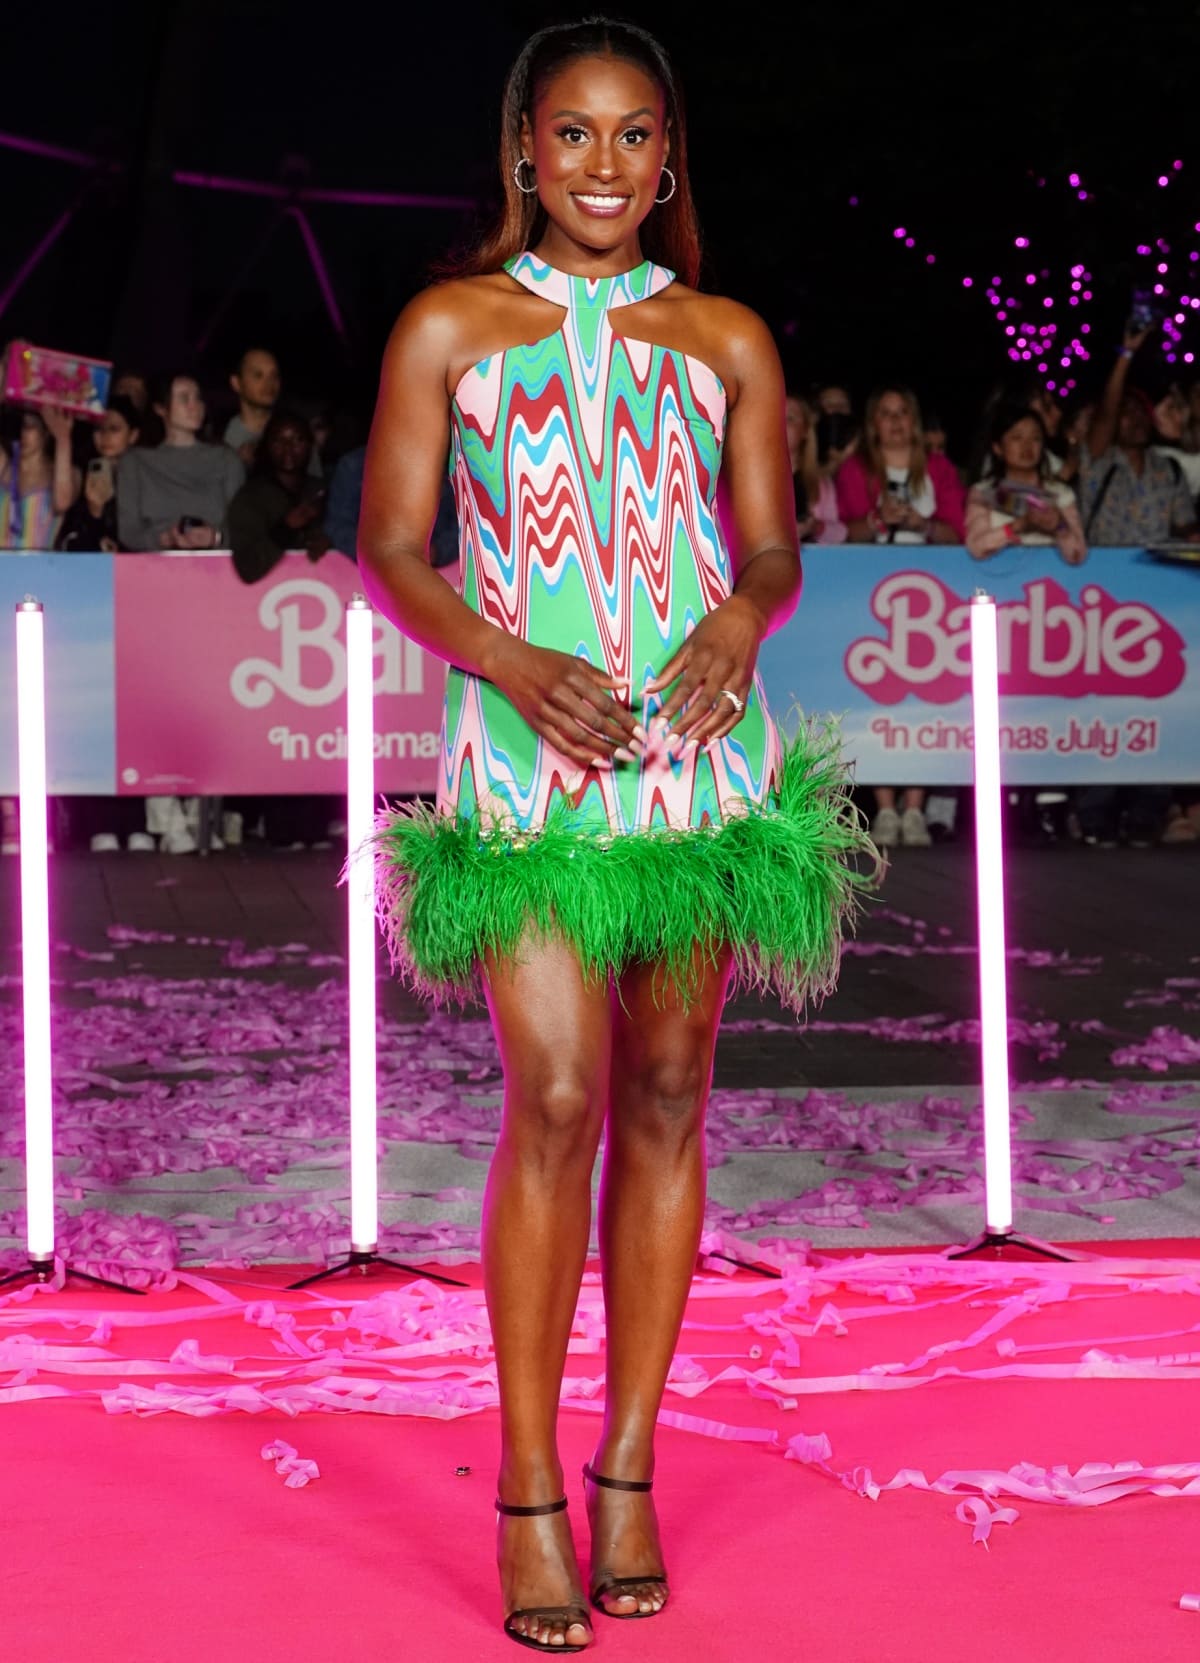 Issa Rae making a stunning entrance in a feathered pink-and-green Spring 2023 creation by PatBo with Piferi heels at the Barbie photocall